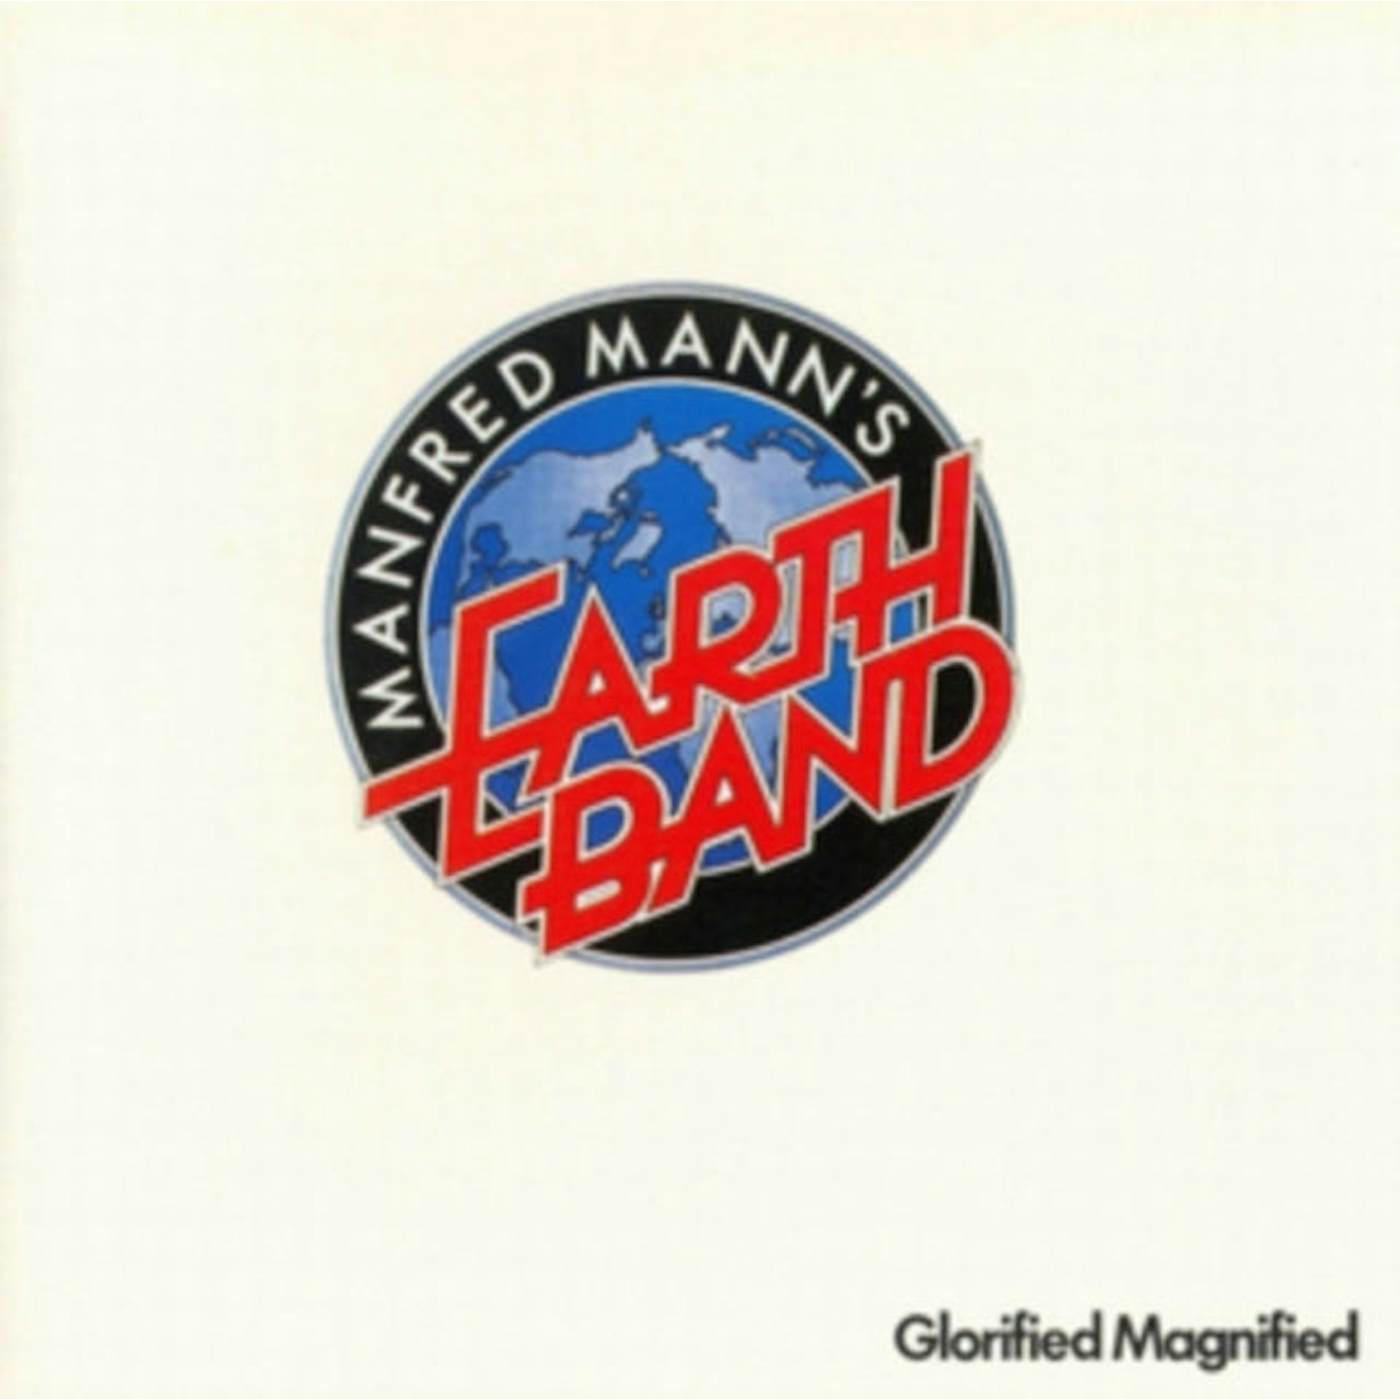 Manfred Mann'S Earth Band LP - Glorified Magnified (Vinyl)